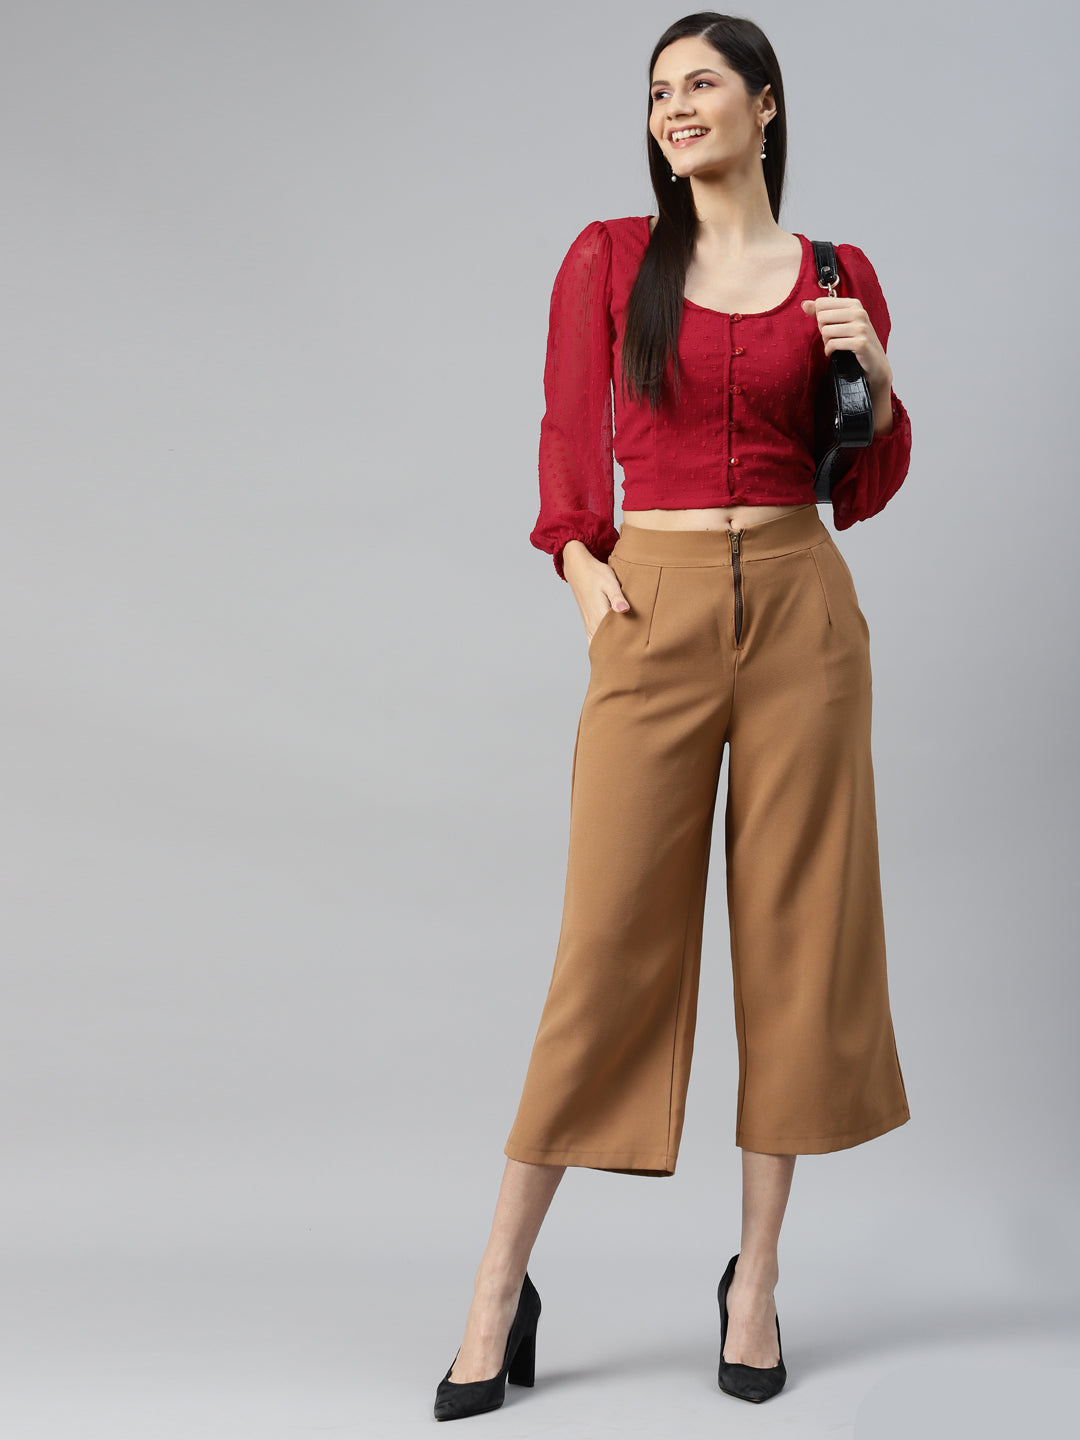 plusS Red Shirt Style Crop Top